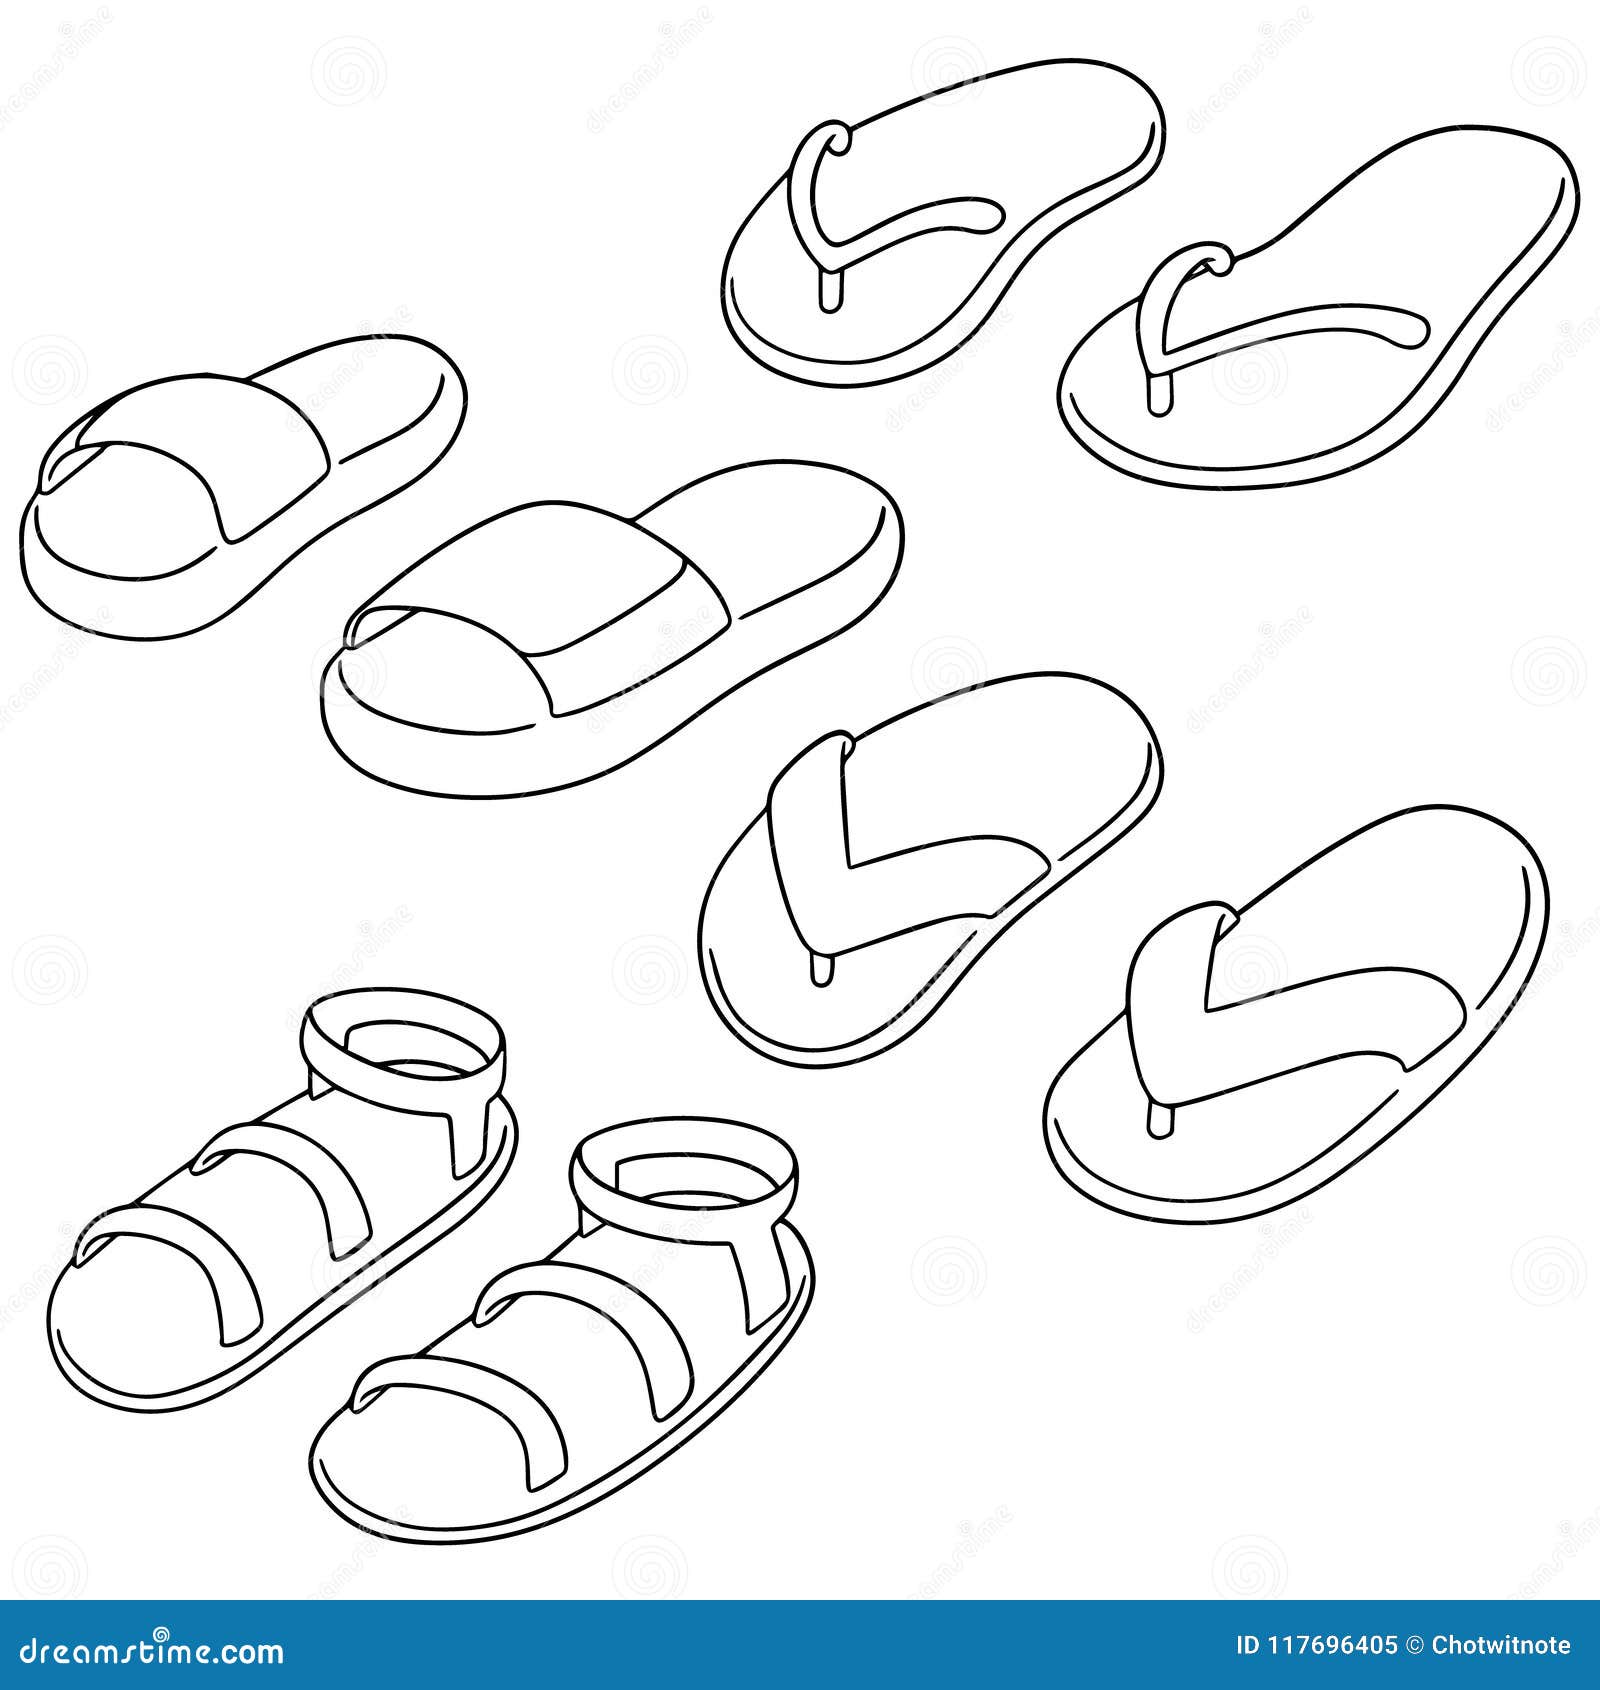 Vector set of slippers stock vector. Illustration of decorative - 117696405